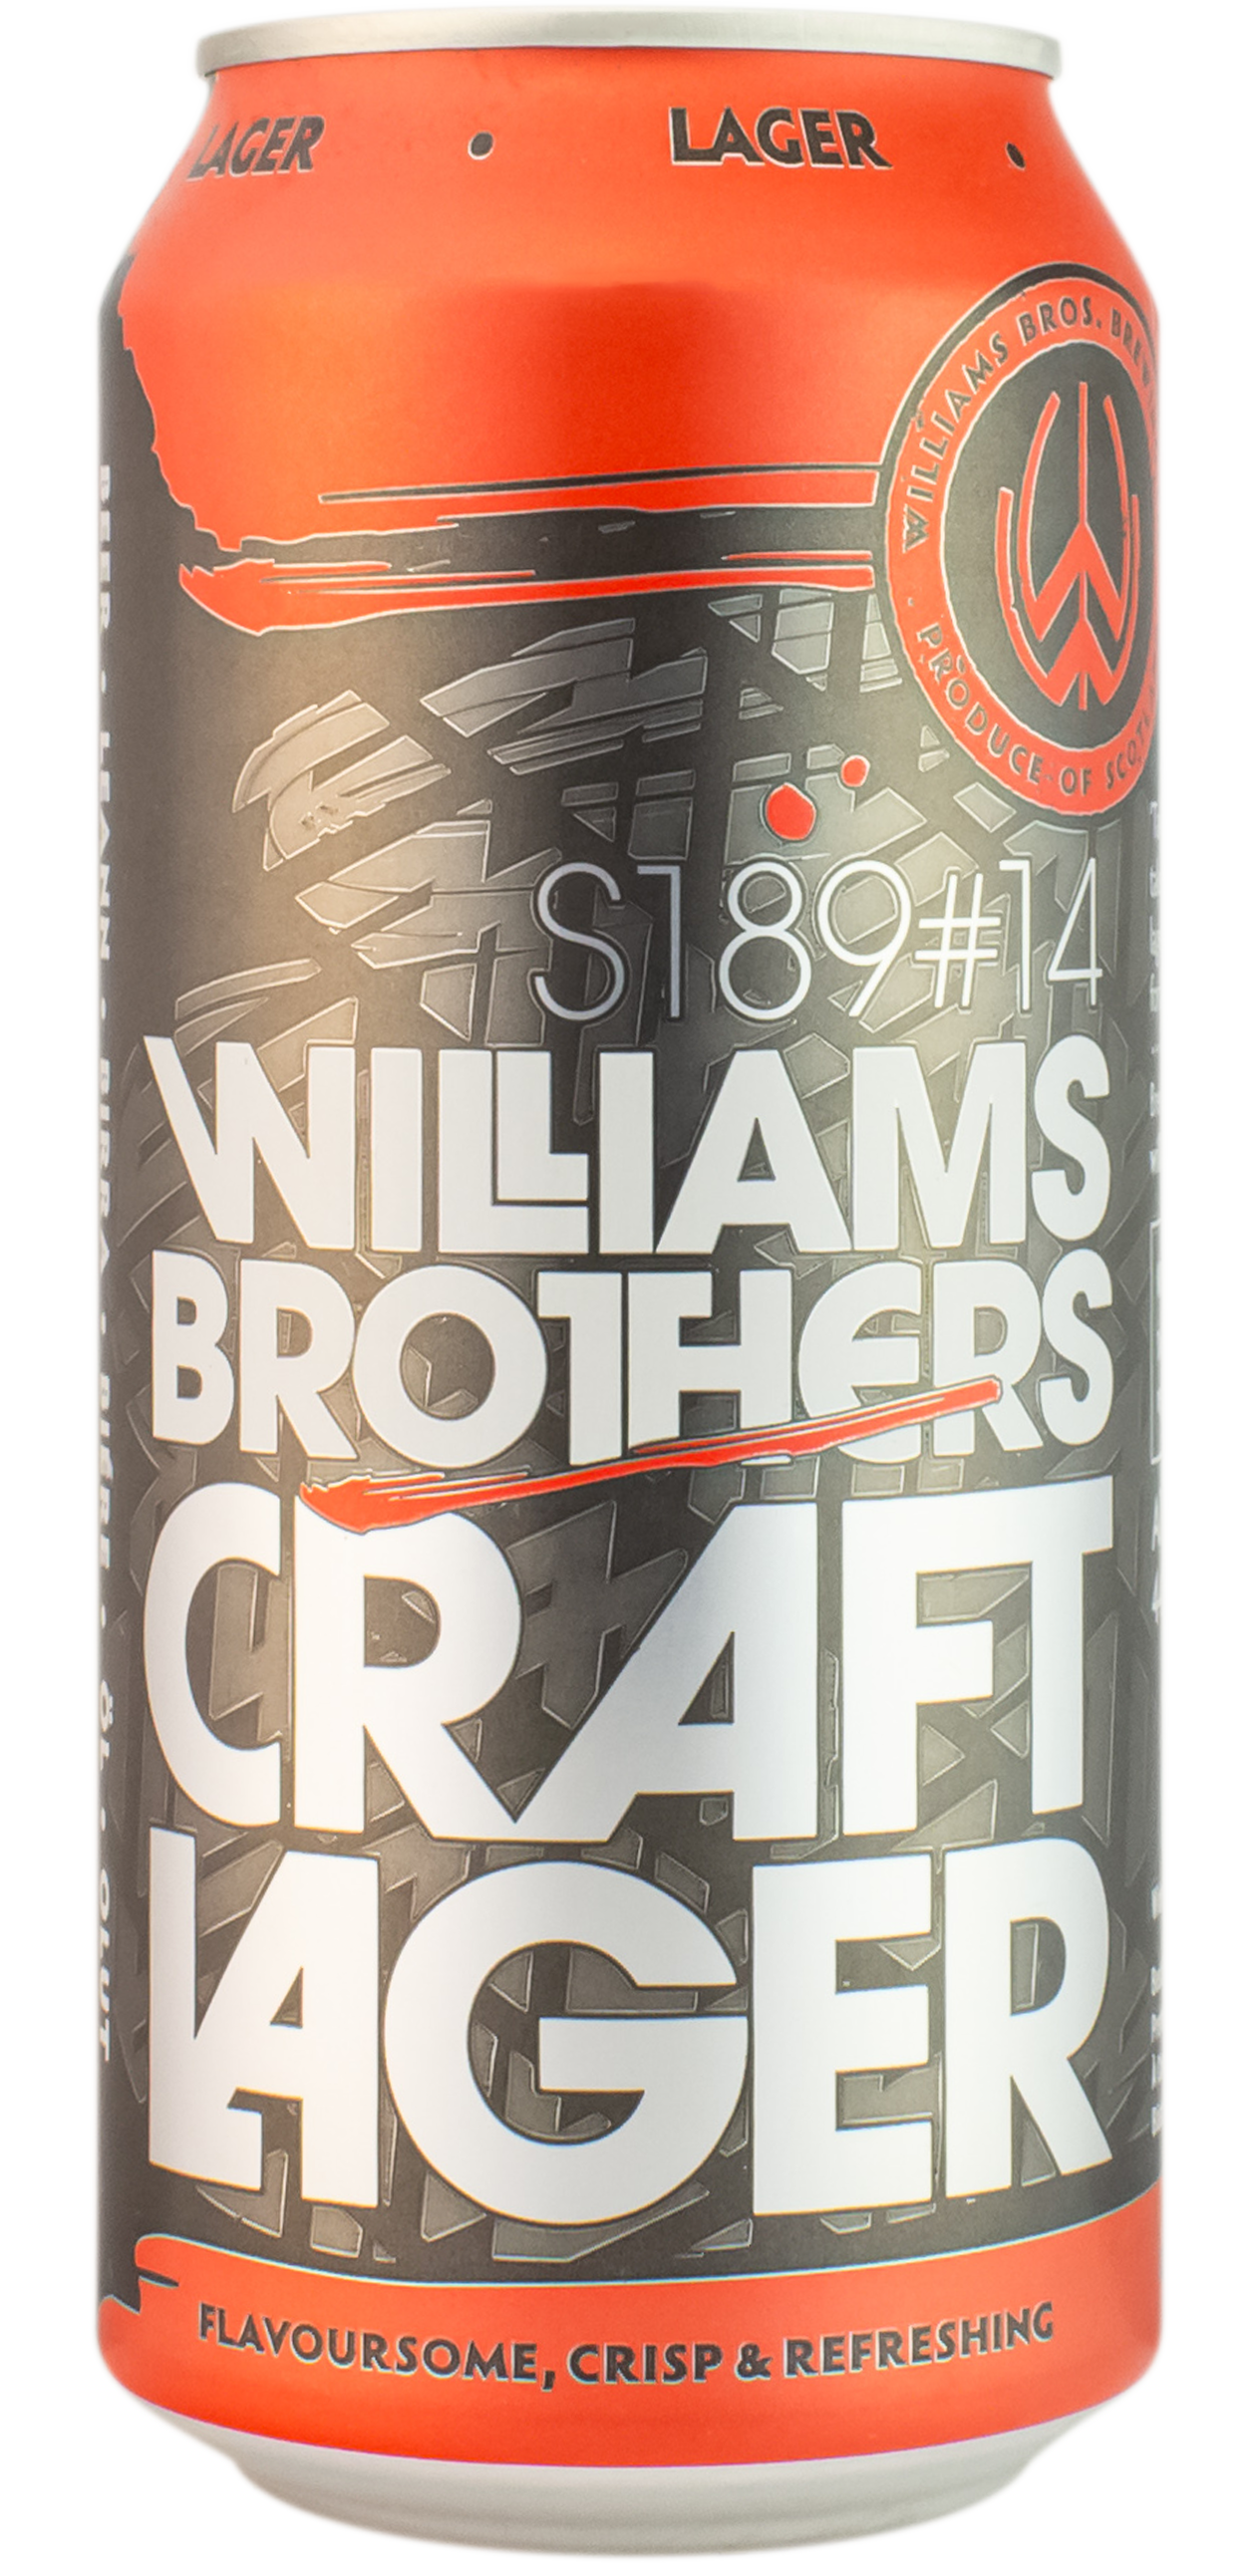 Craft Lager (S189#14)